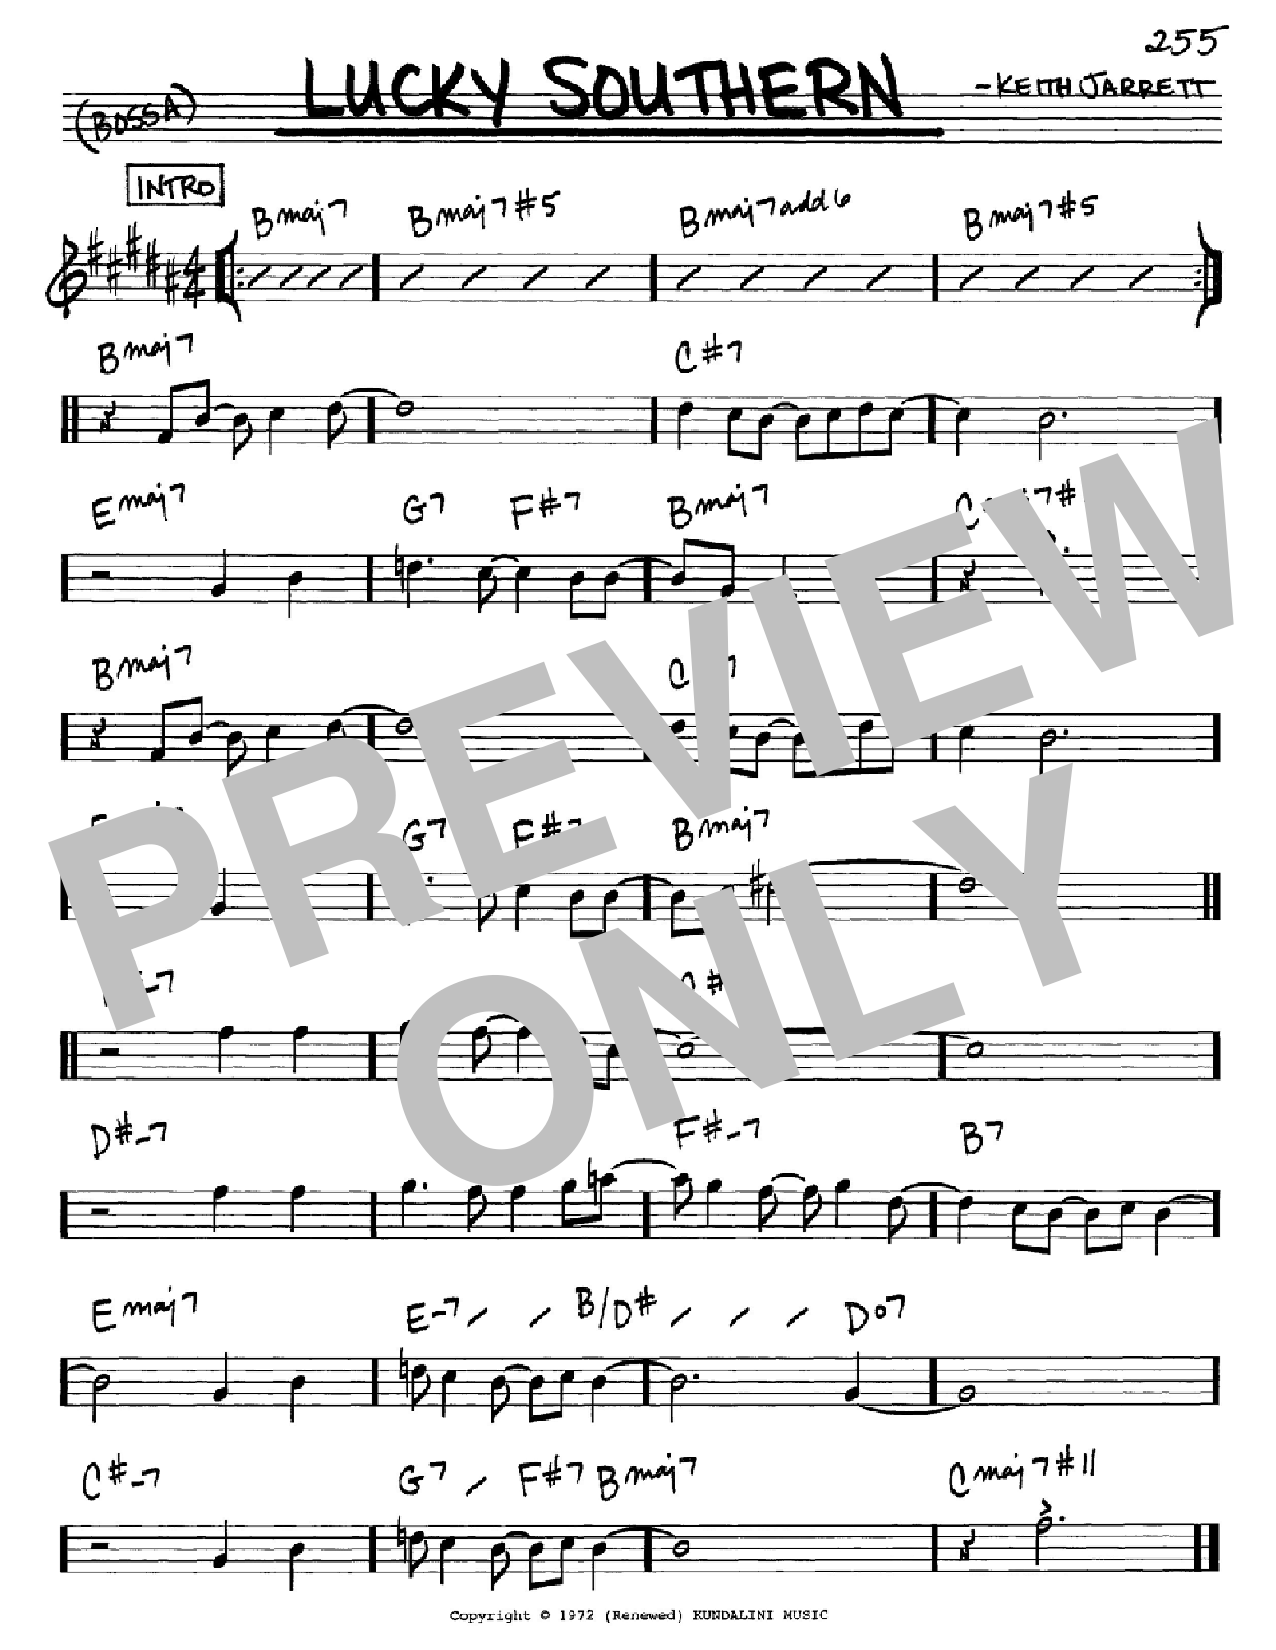 Download Keith Jarrett Lucky Southern Sheet Music